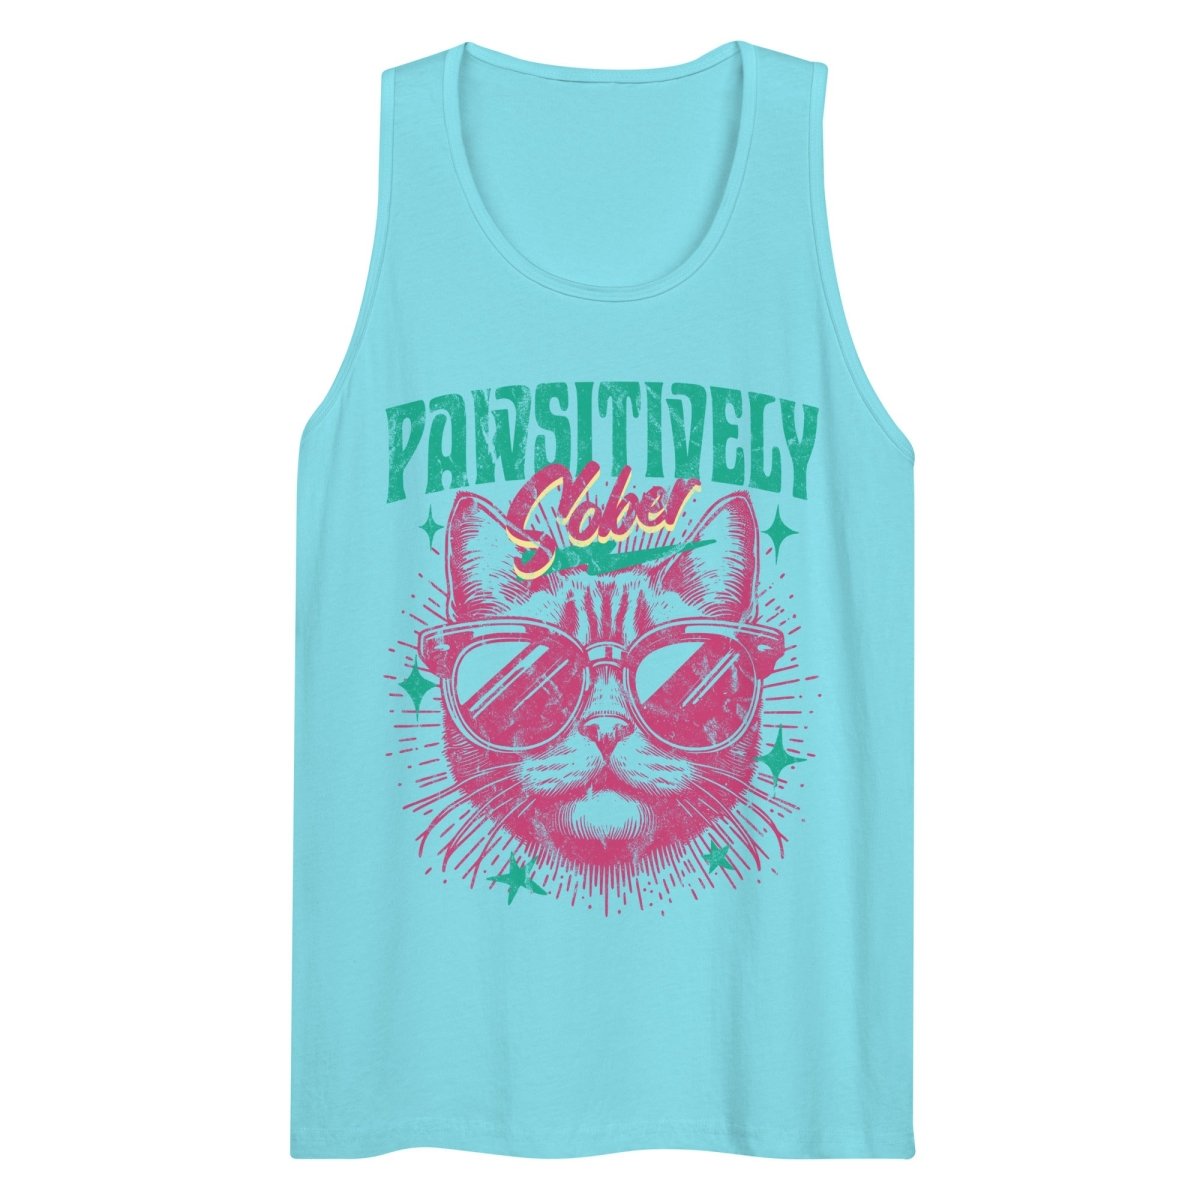 Premium Sobriety Tank Top for Men - Pawsitively Empowered - Pacific Blue / S | Sobervation